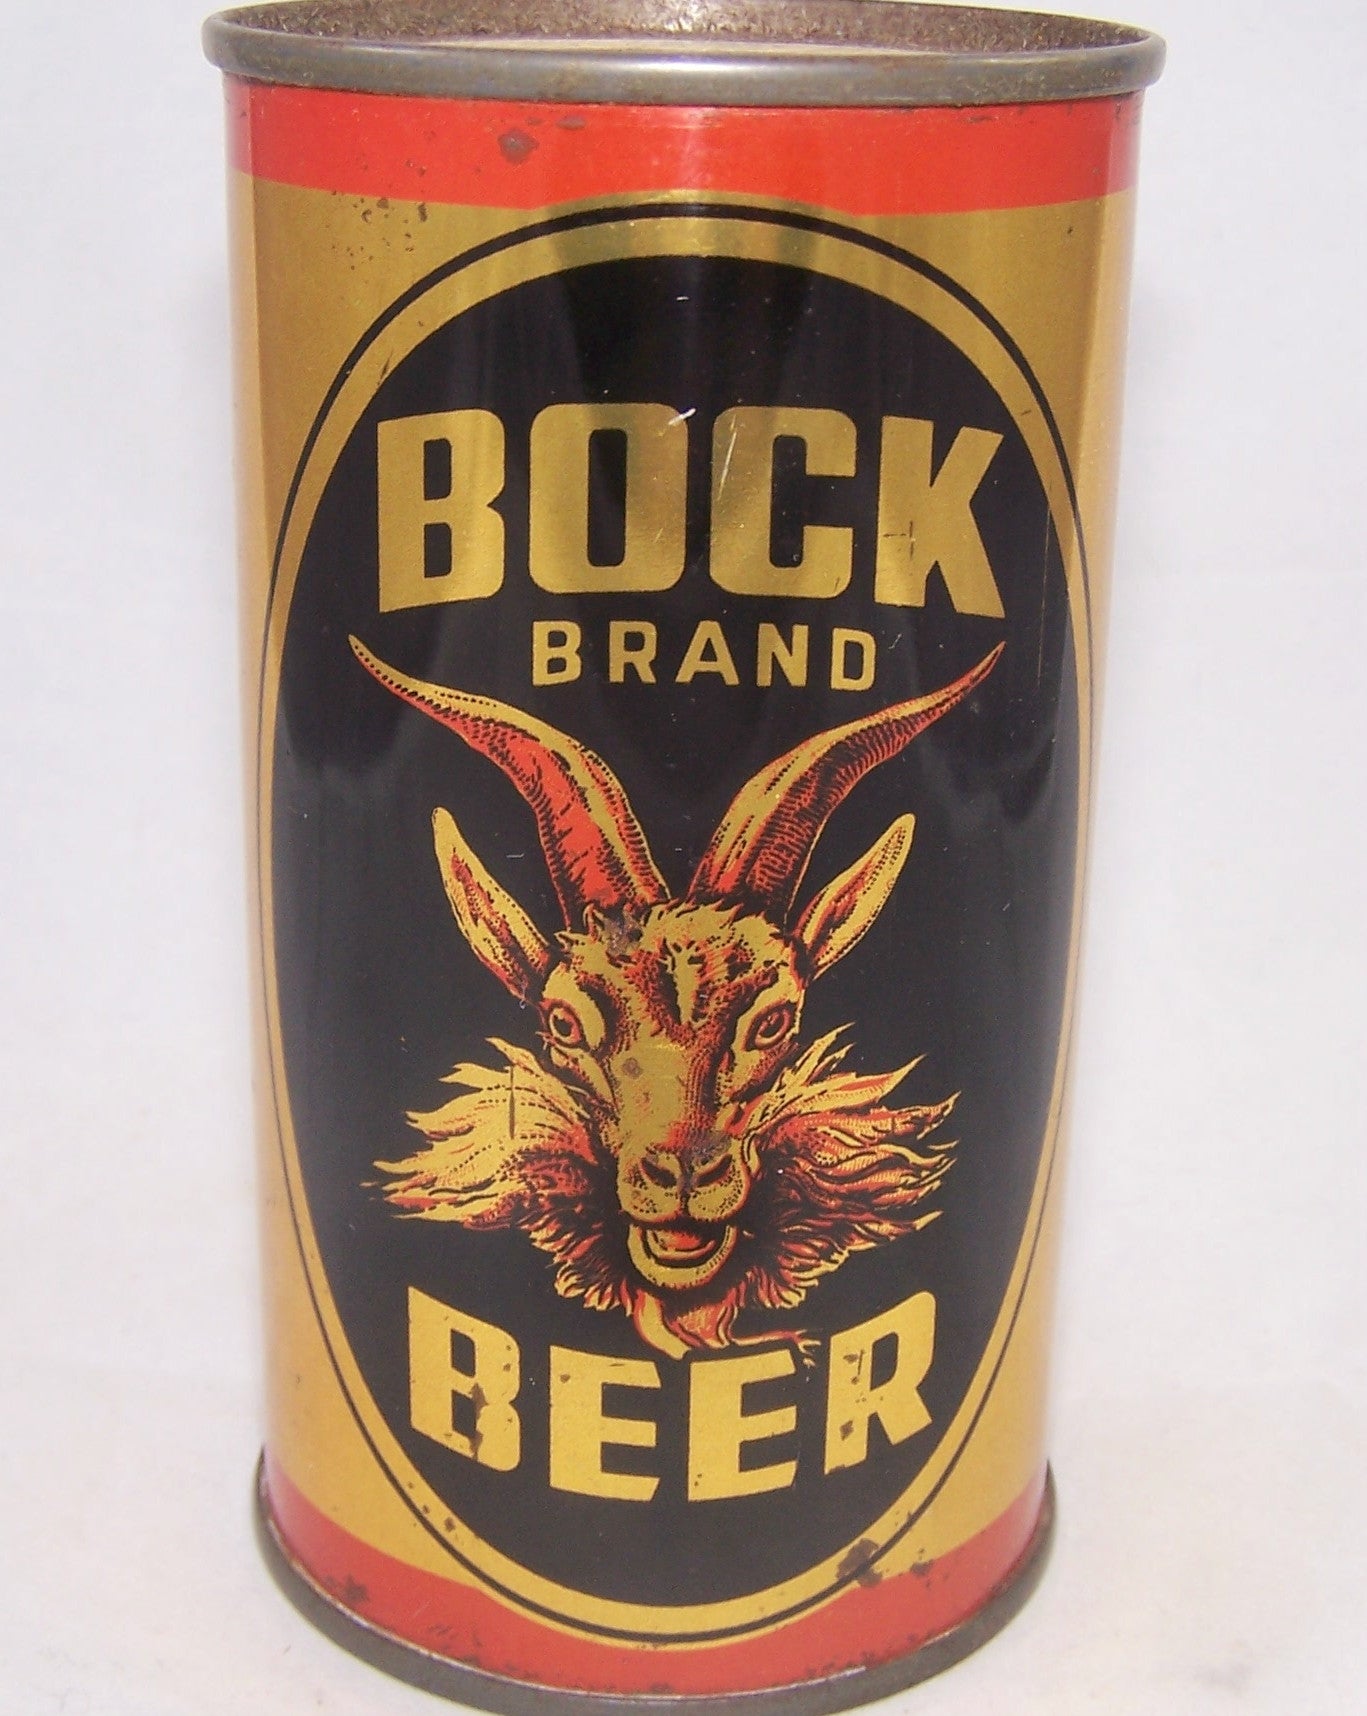 Bock Brand Beer, USBC 40-04, Grade 1 to 1/1- Sold on 06/09/17